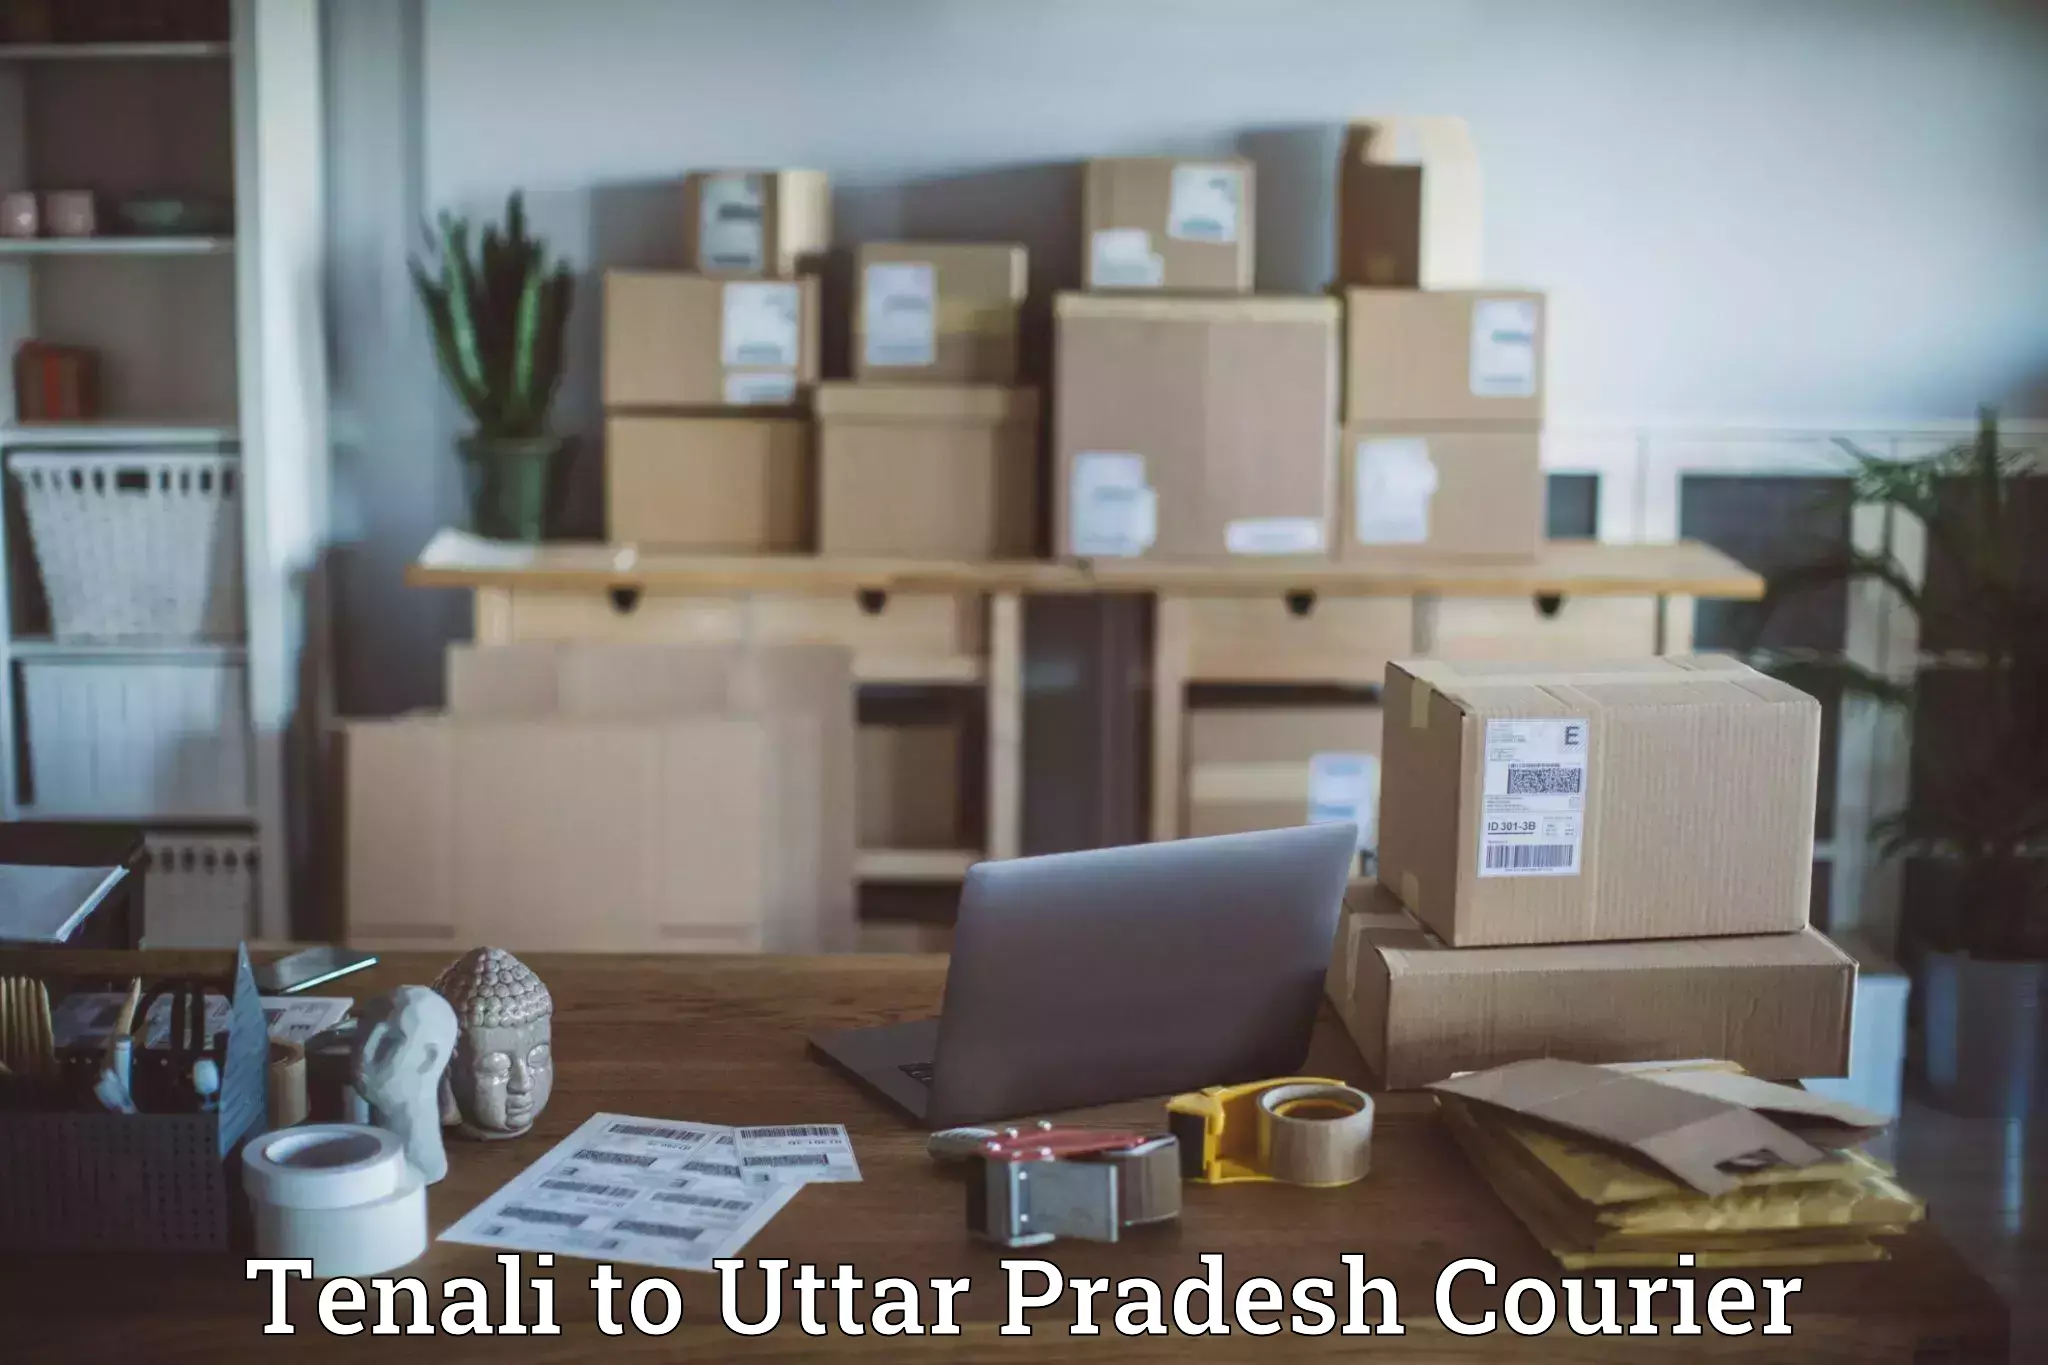 Courier service partnerships Tenali to Fatehpur